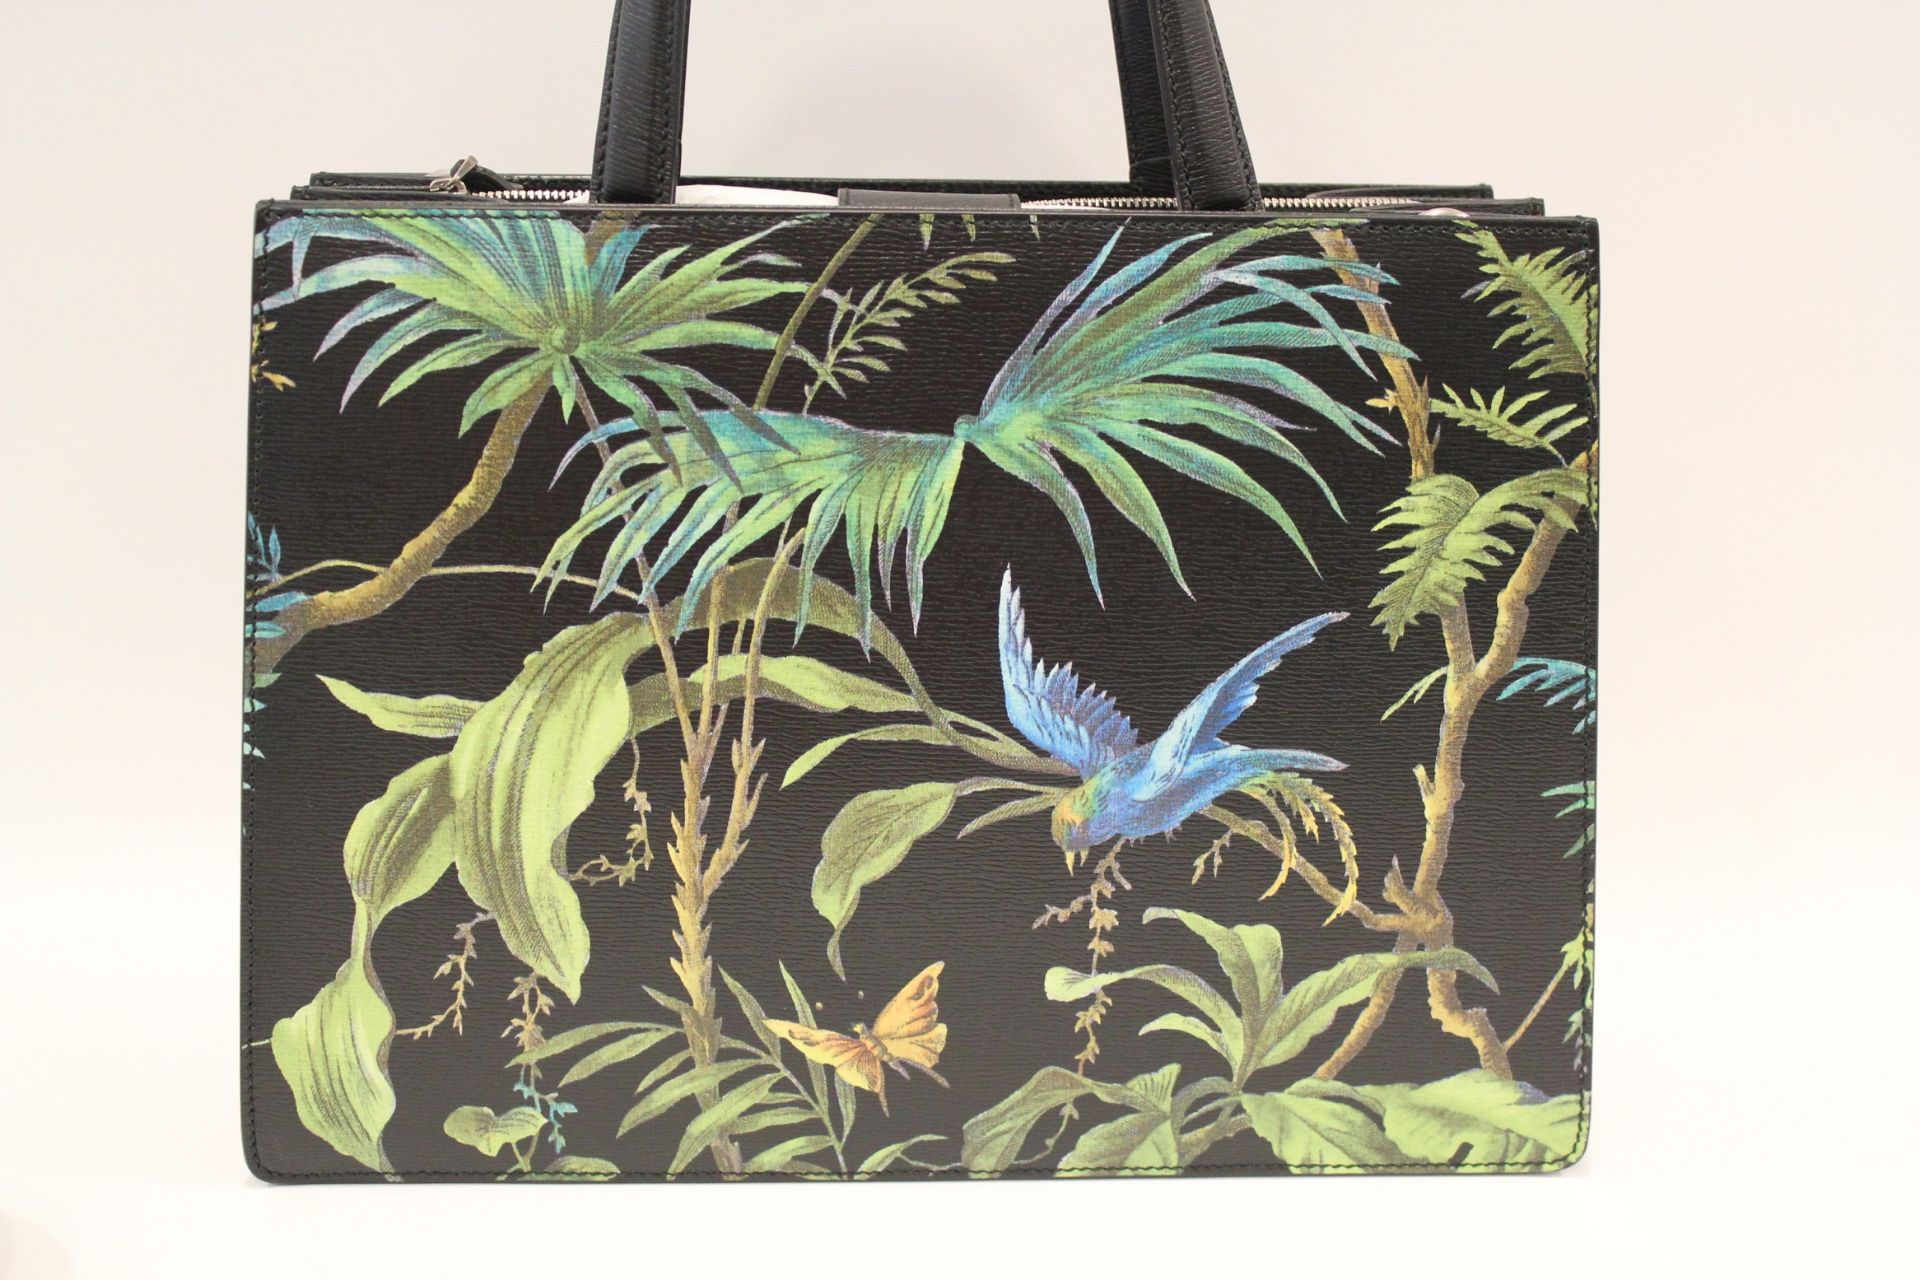 GUCCI Dionysus Tropical Print Top Handle Tote with Front Pocket - Image 4 of 8